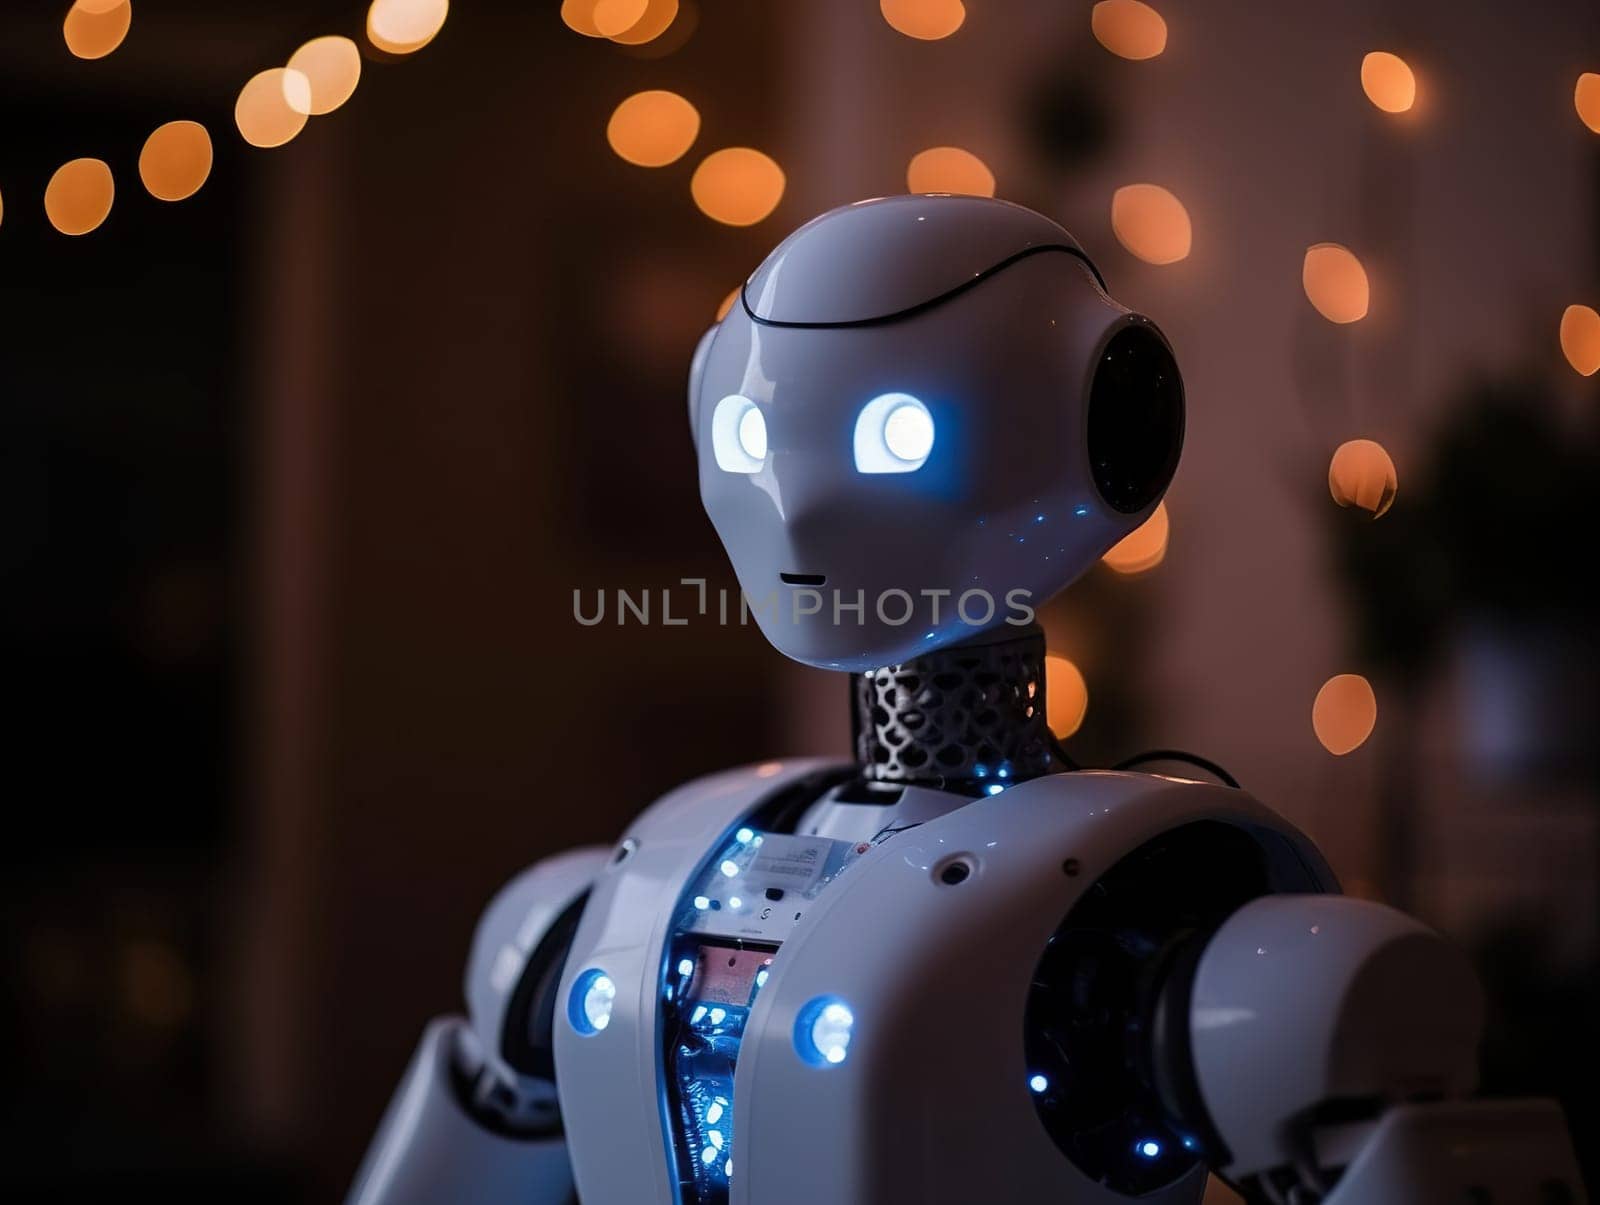 Android Robot On A Christmas Background by tan4ikk1